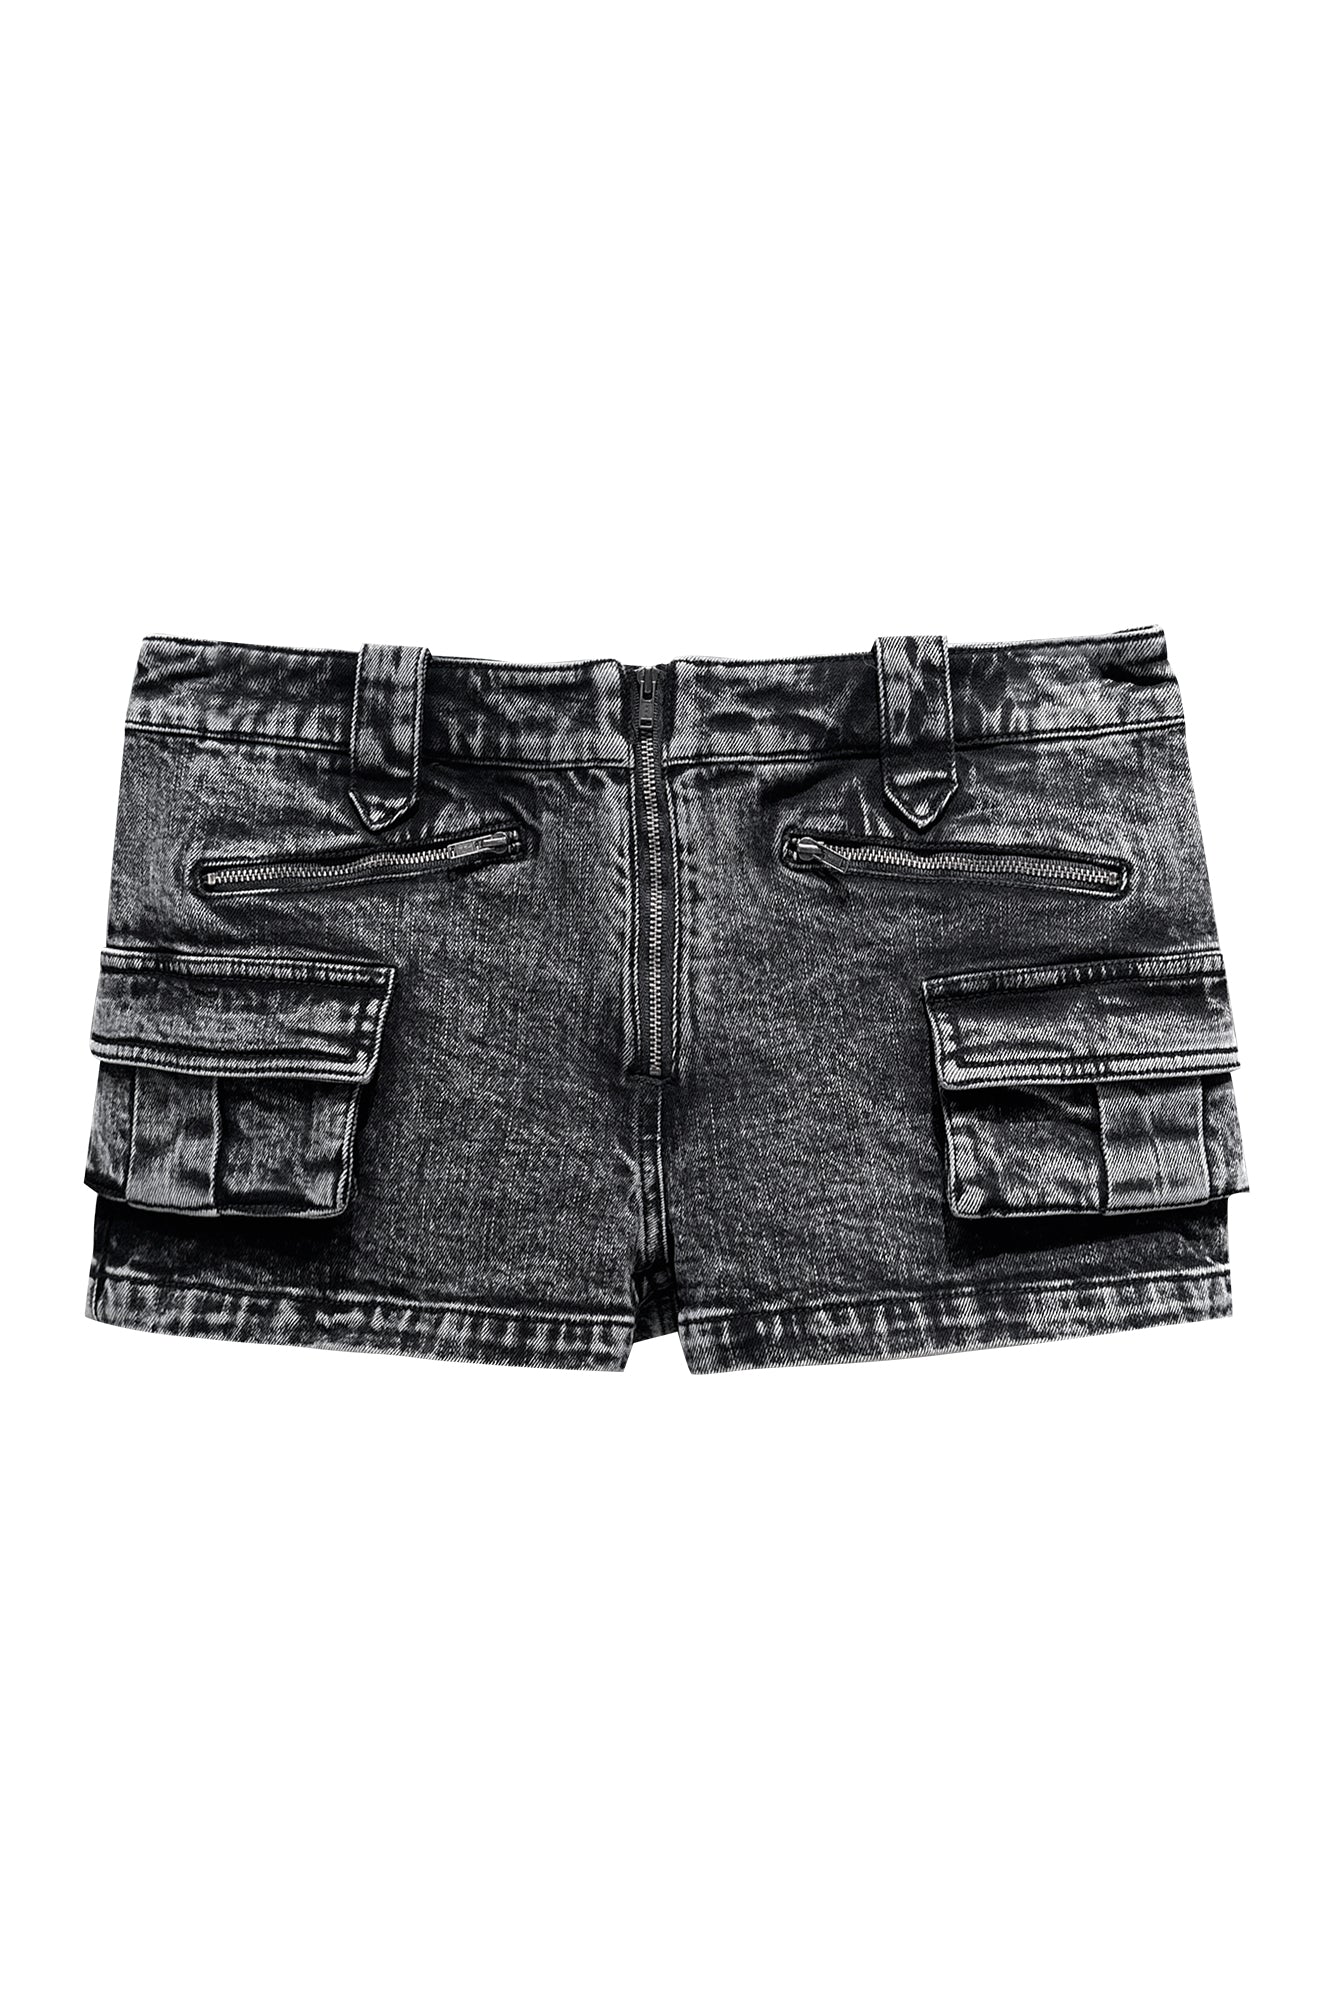 Low waist tooling jeans shorts